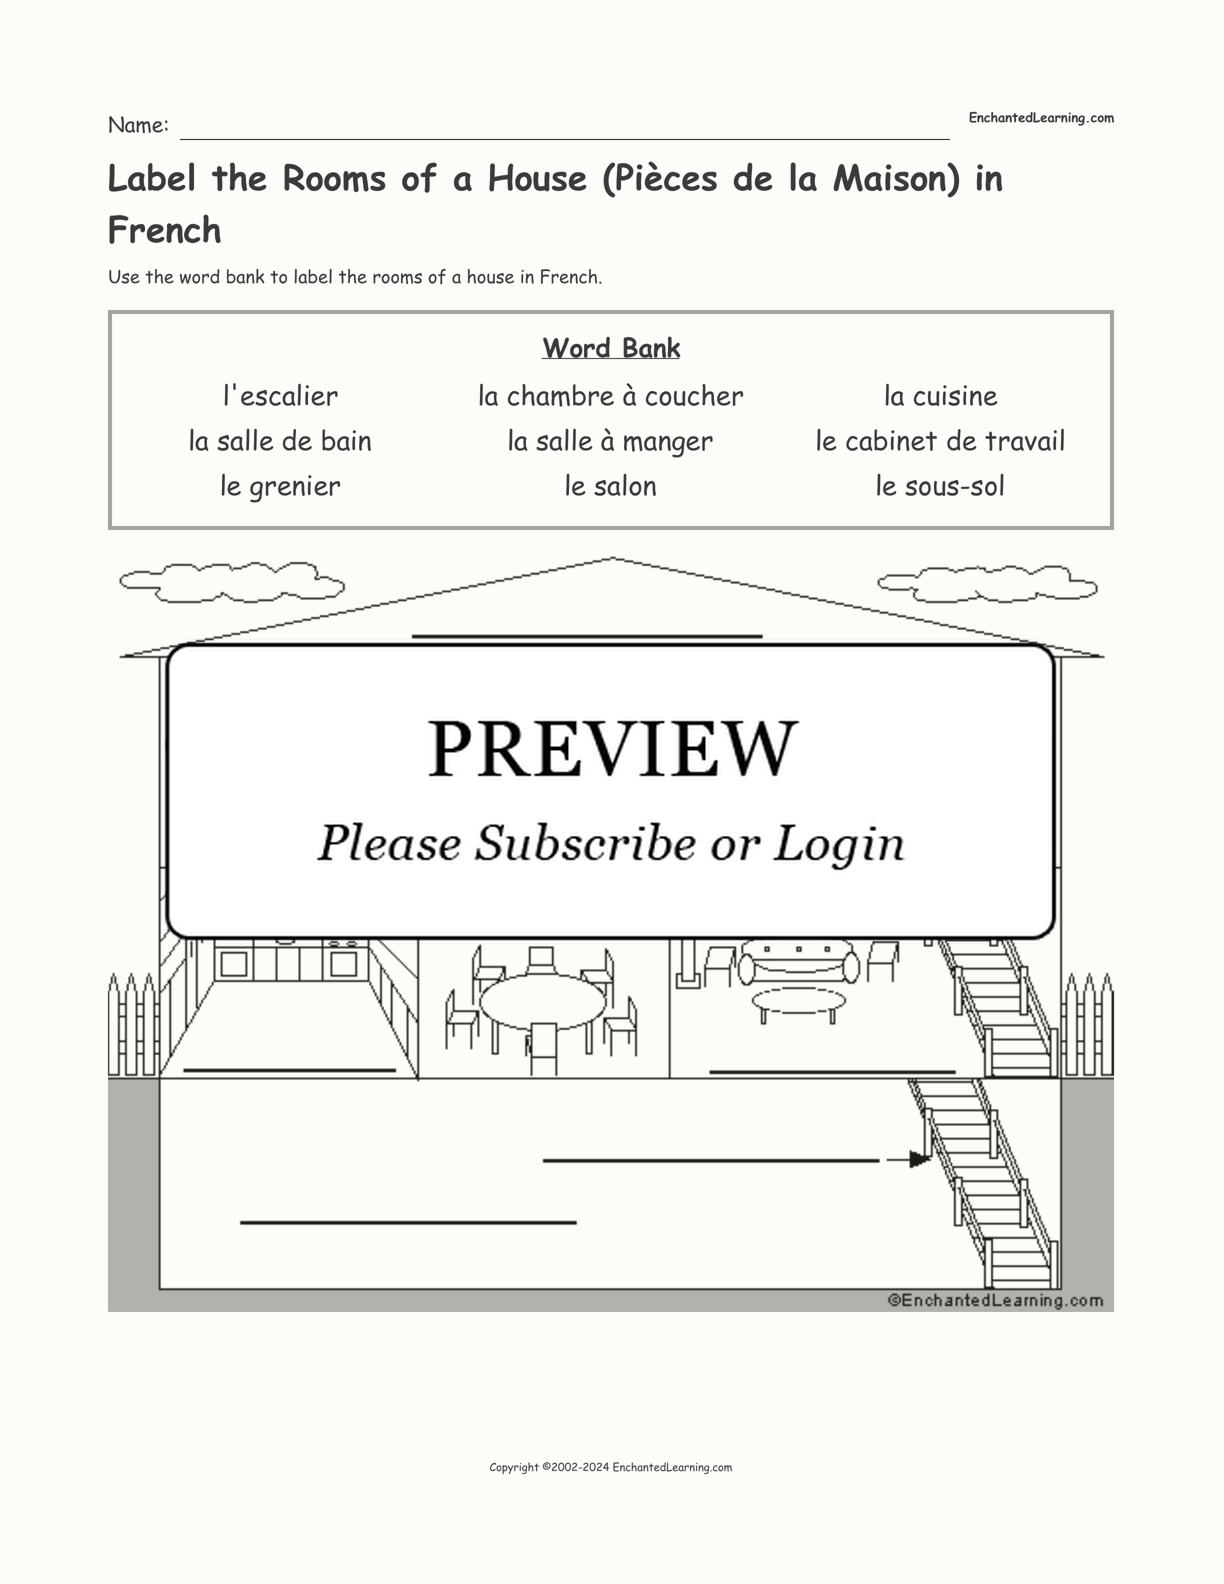 Label the Rooms of a House (Pièces de la Maison) in French interactive worksheet page 1